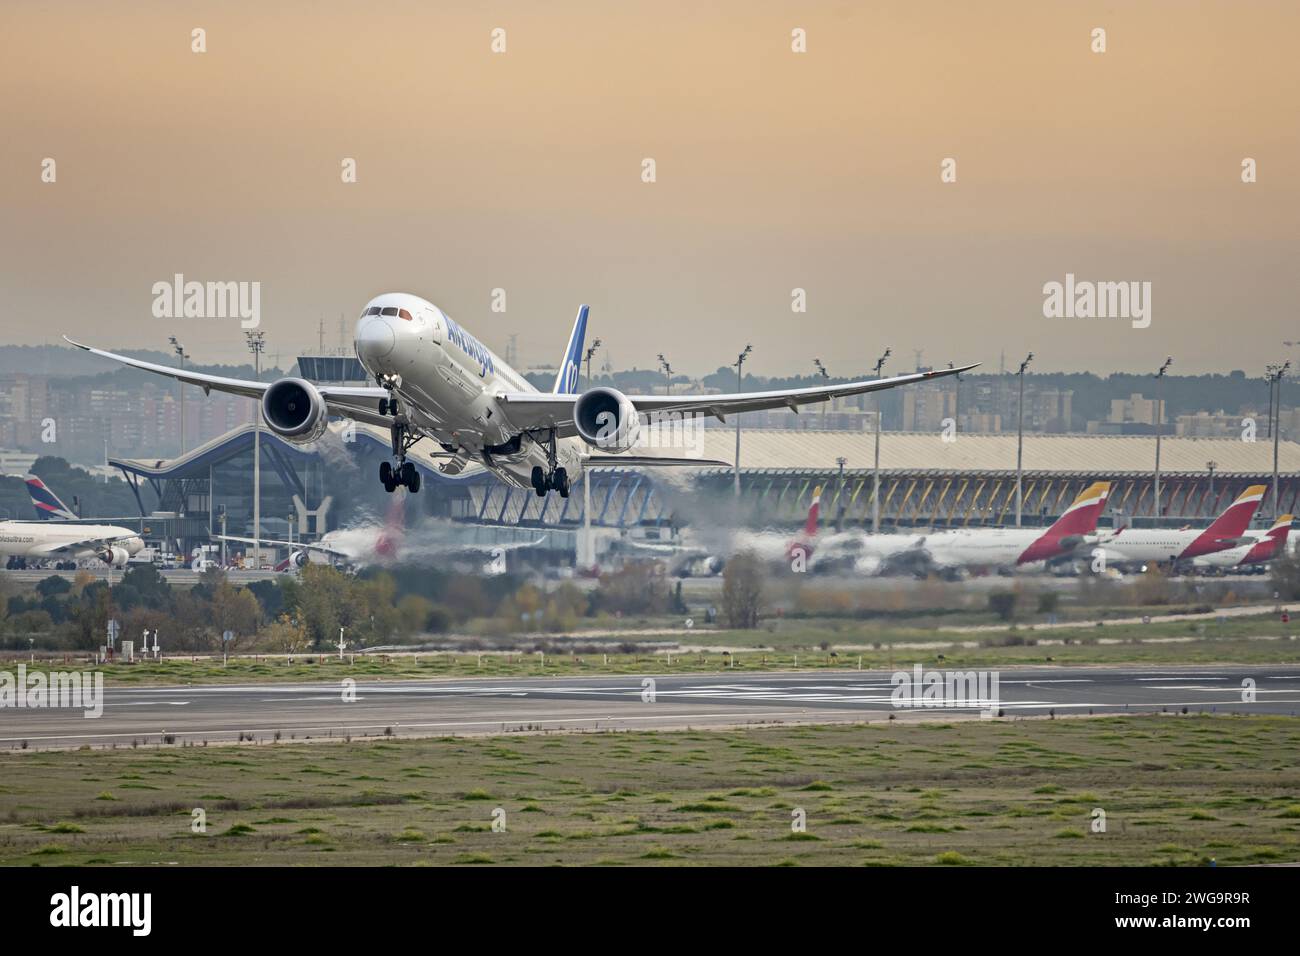 Engine at full power at takeoff of a passenger plane ascending to head to its destination Stock Photo